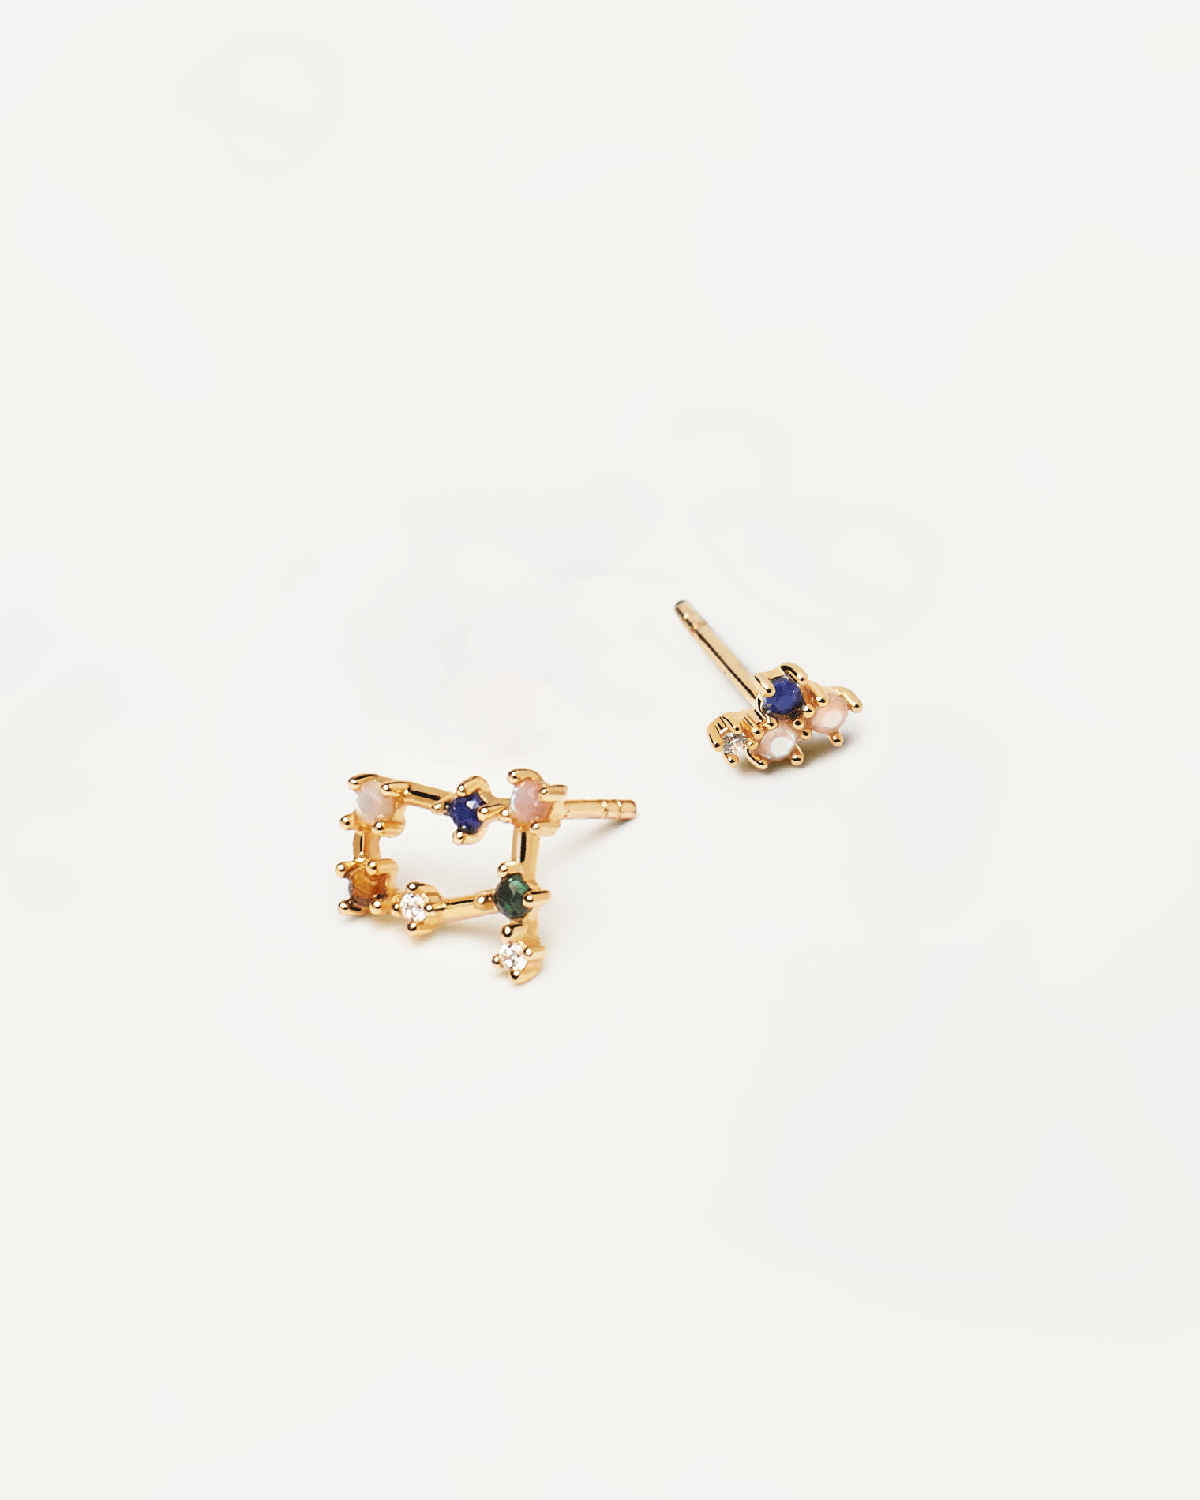 2021 Selection | Gemini Earrings. Get the latest arrival from PDPAOLA. Place your order safely and get this Best Seller. Free Shipping over 70€